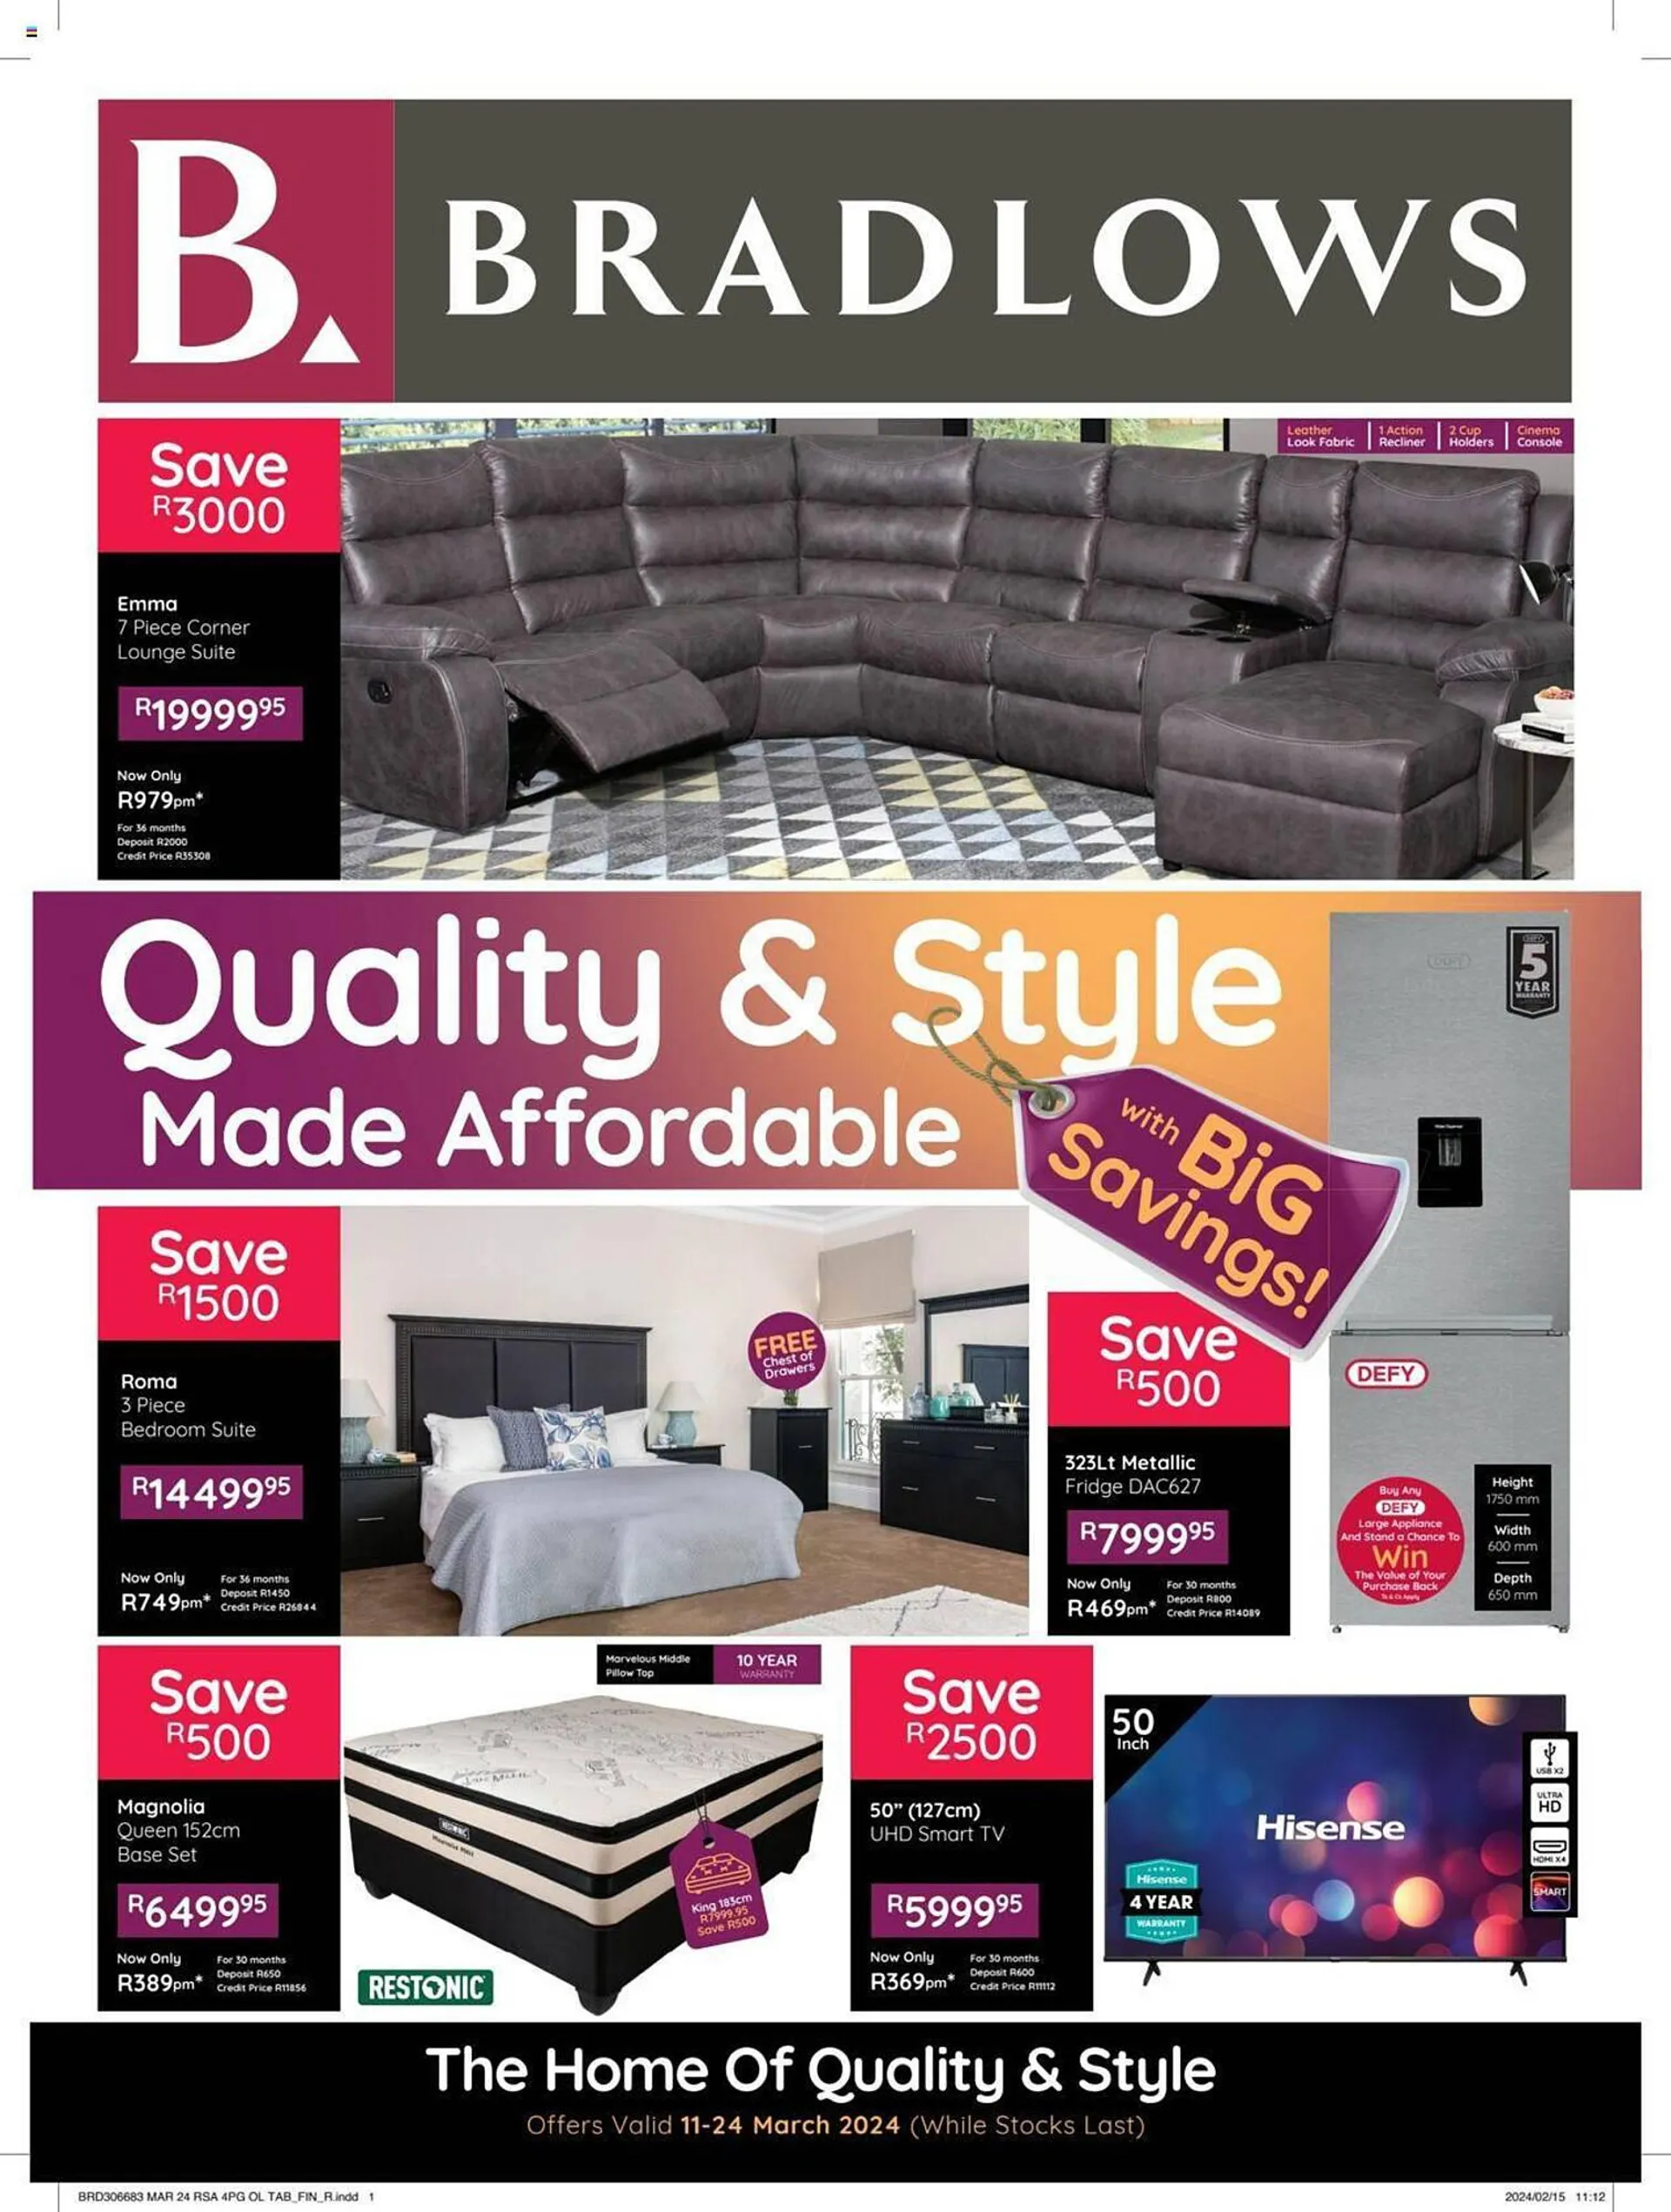 Bradlows catalogue - 11 March 24 March 2024 - Page 1